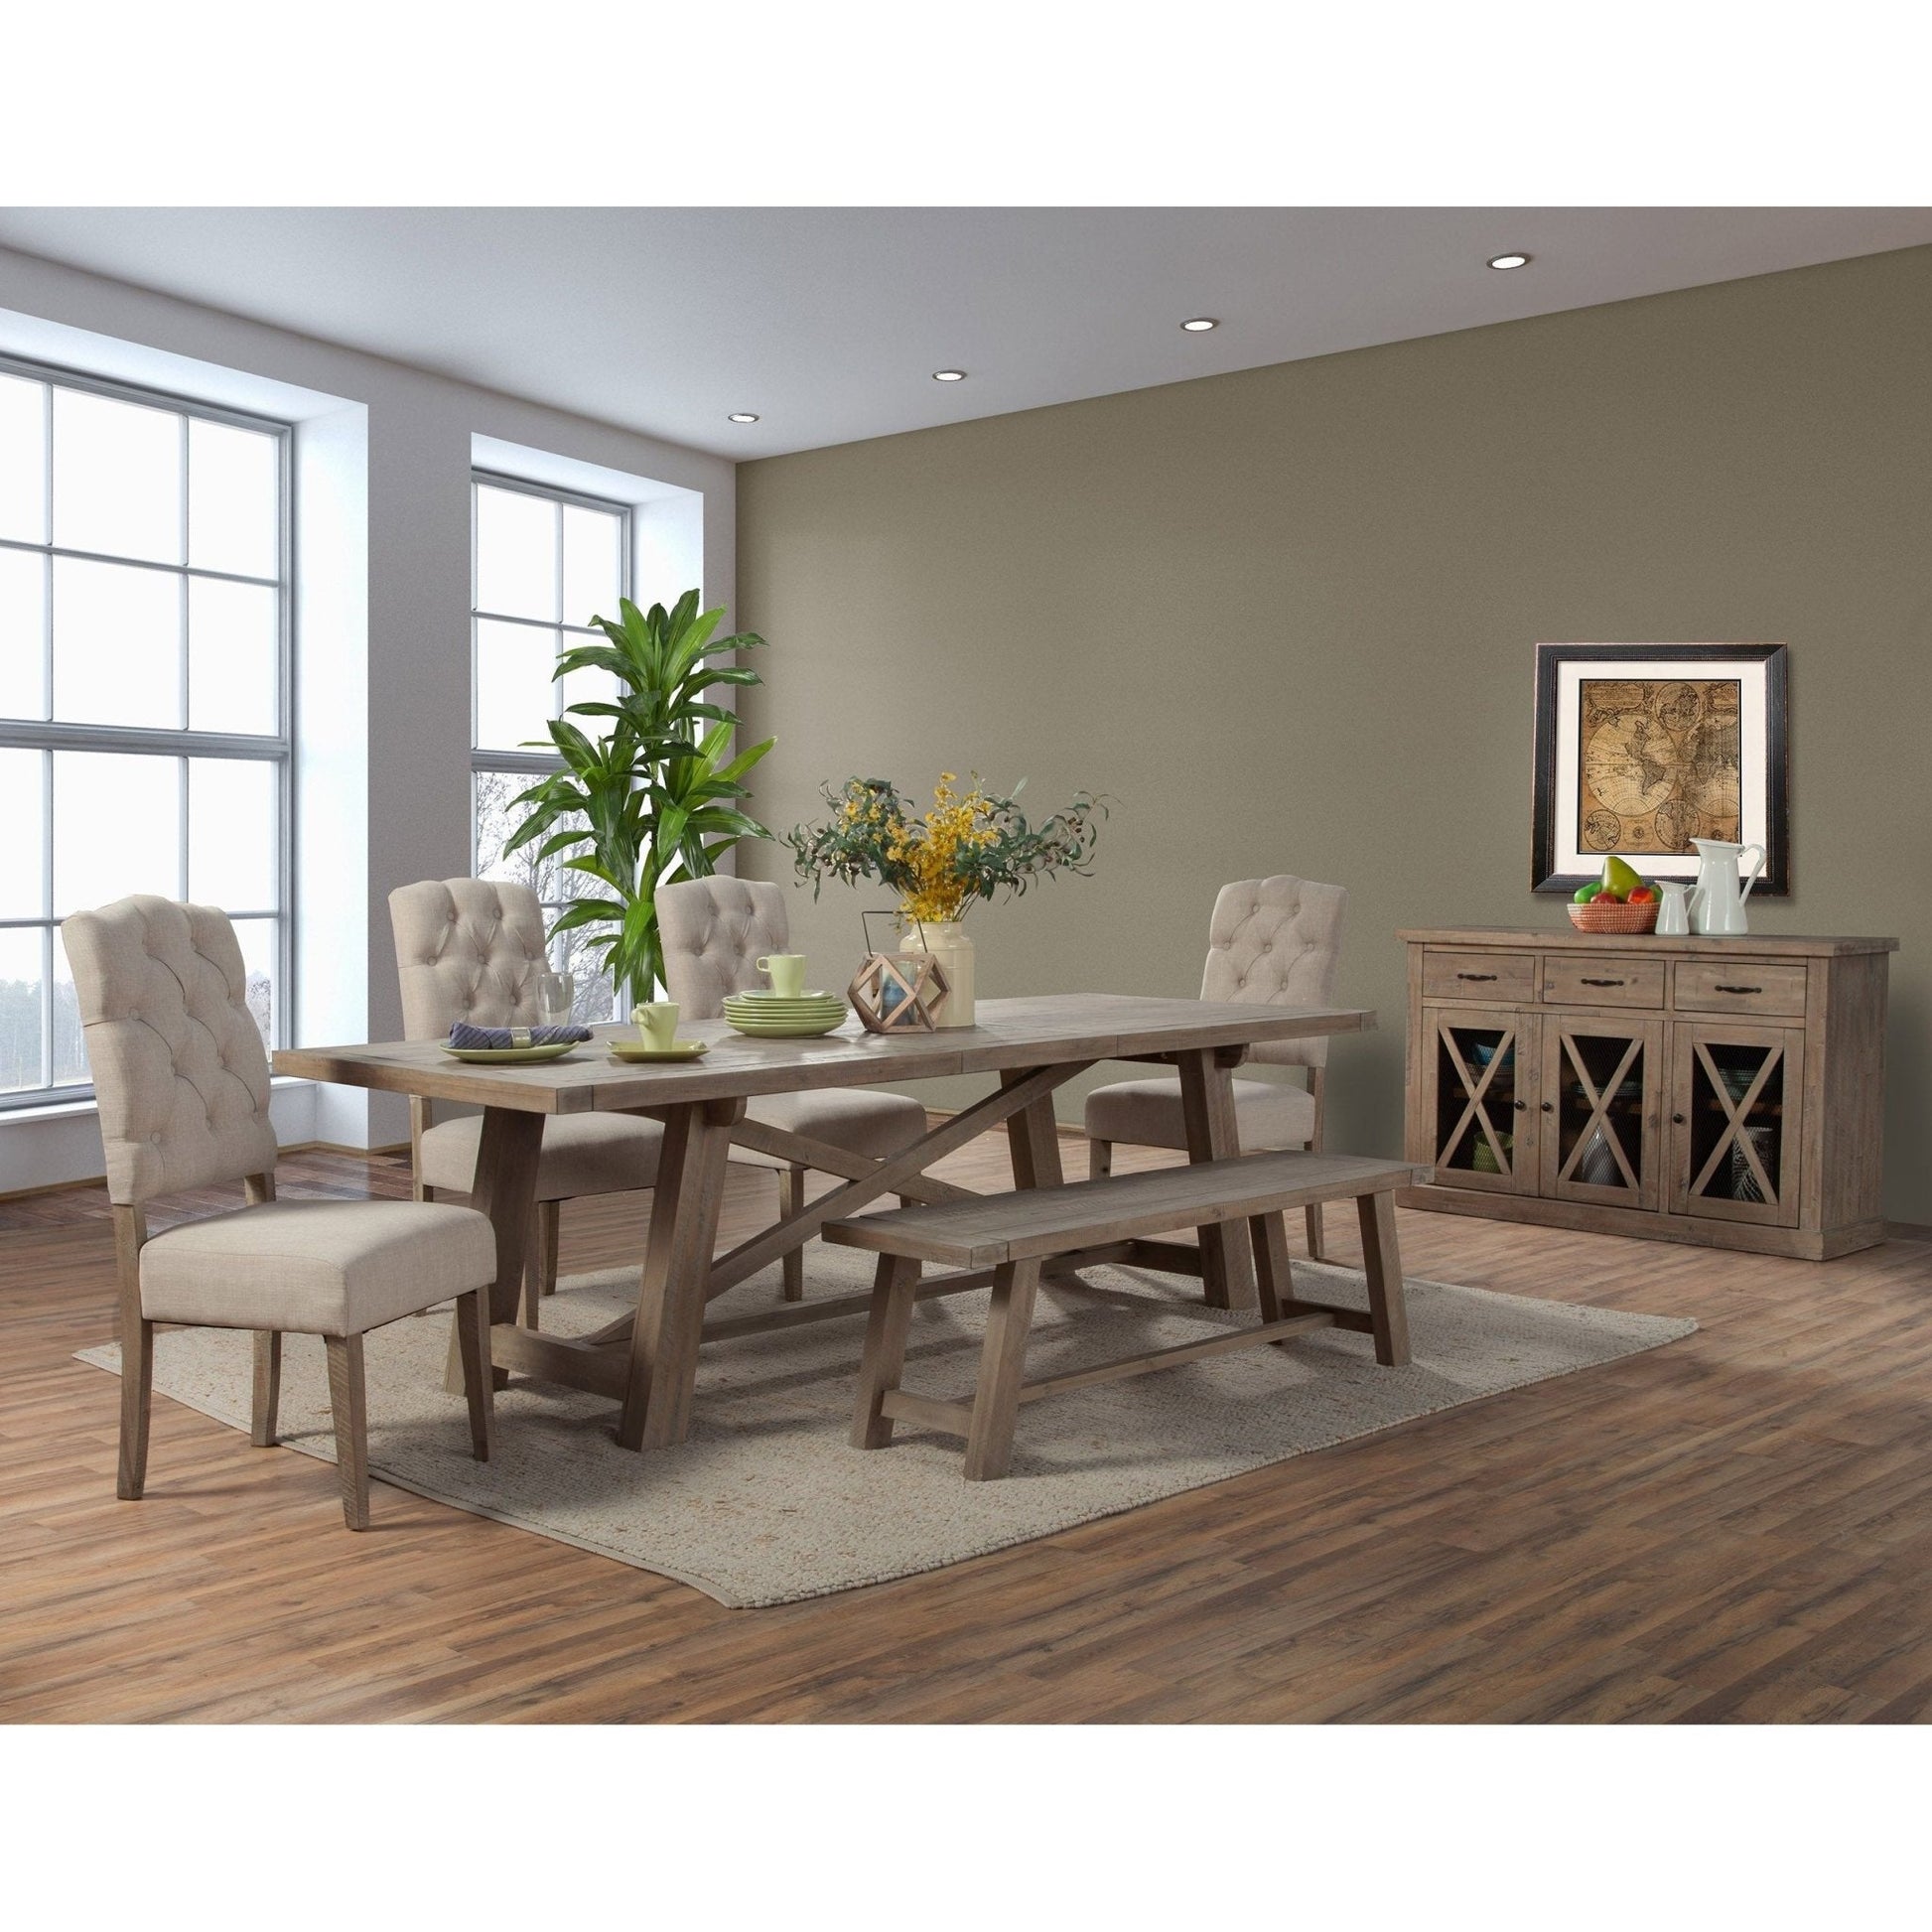 Newberry Rectangular Dining Table, Weathered Natural